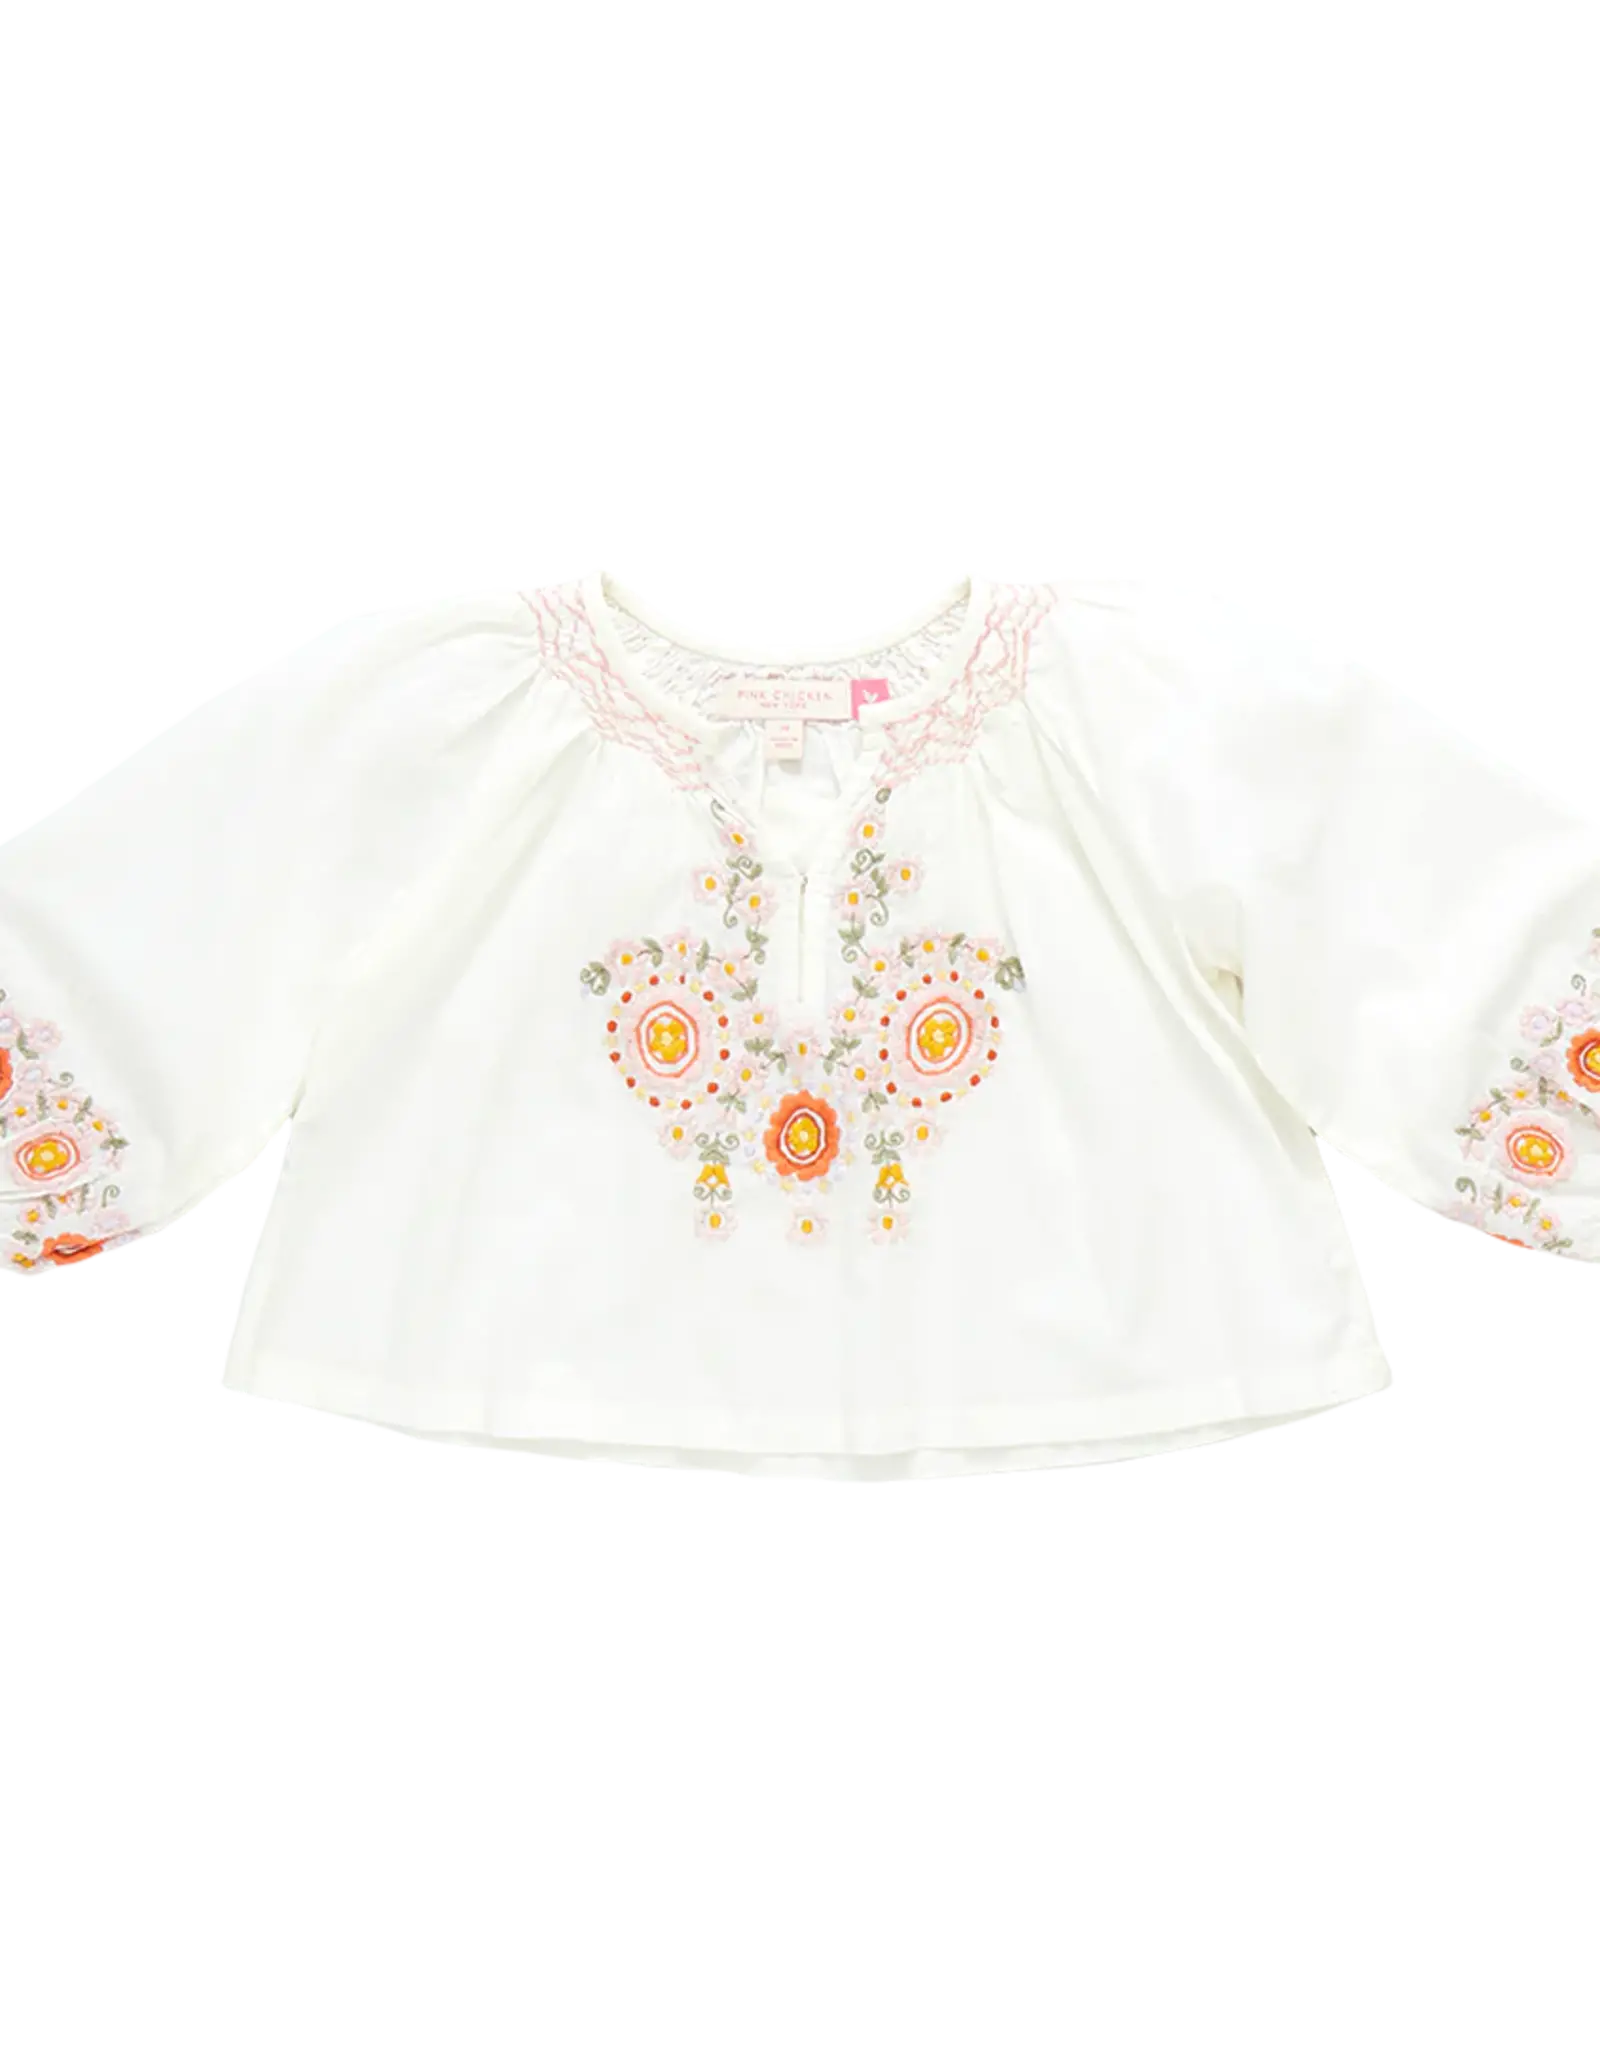 Pink Chicken girls ava top - multi pink embroidery